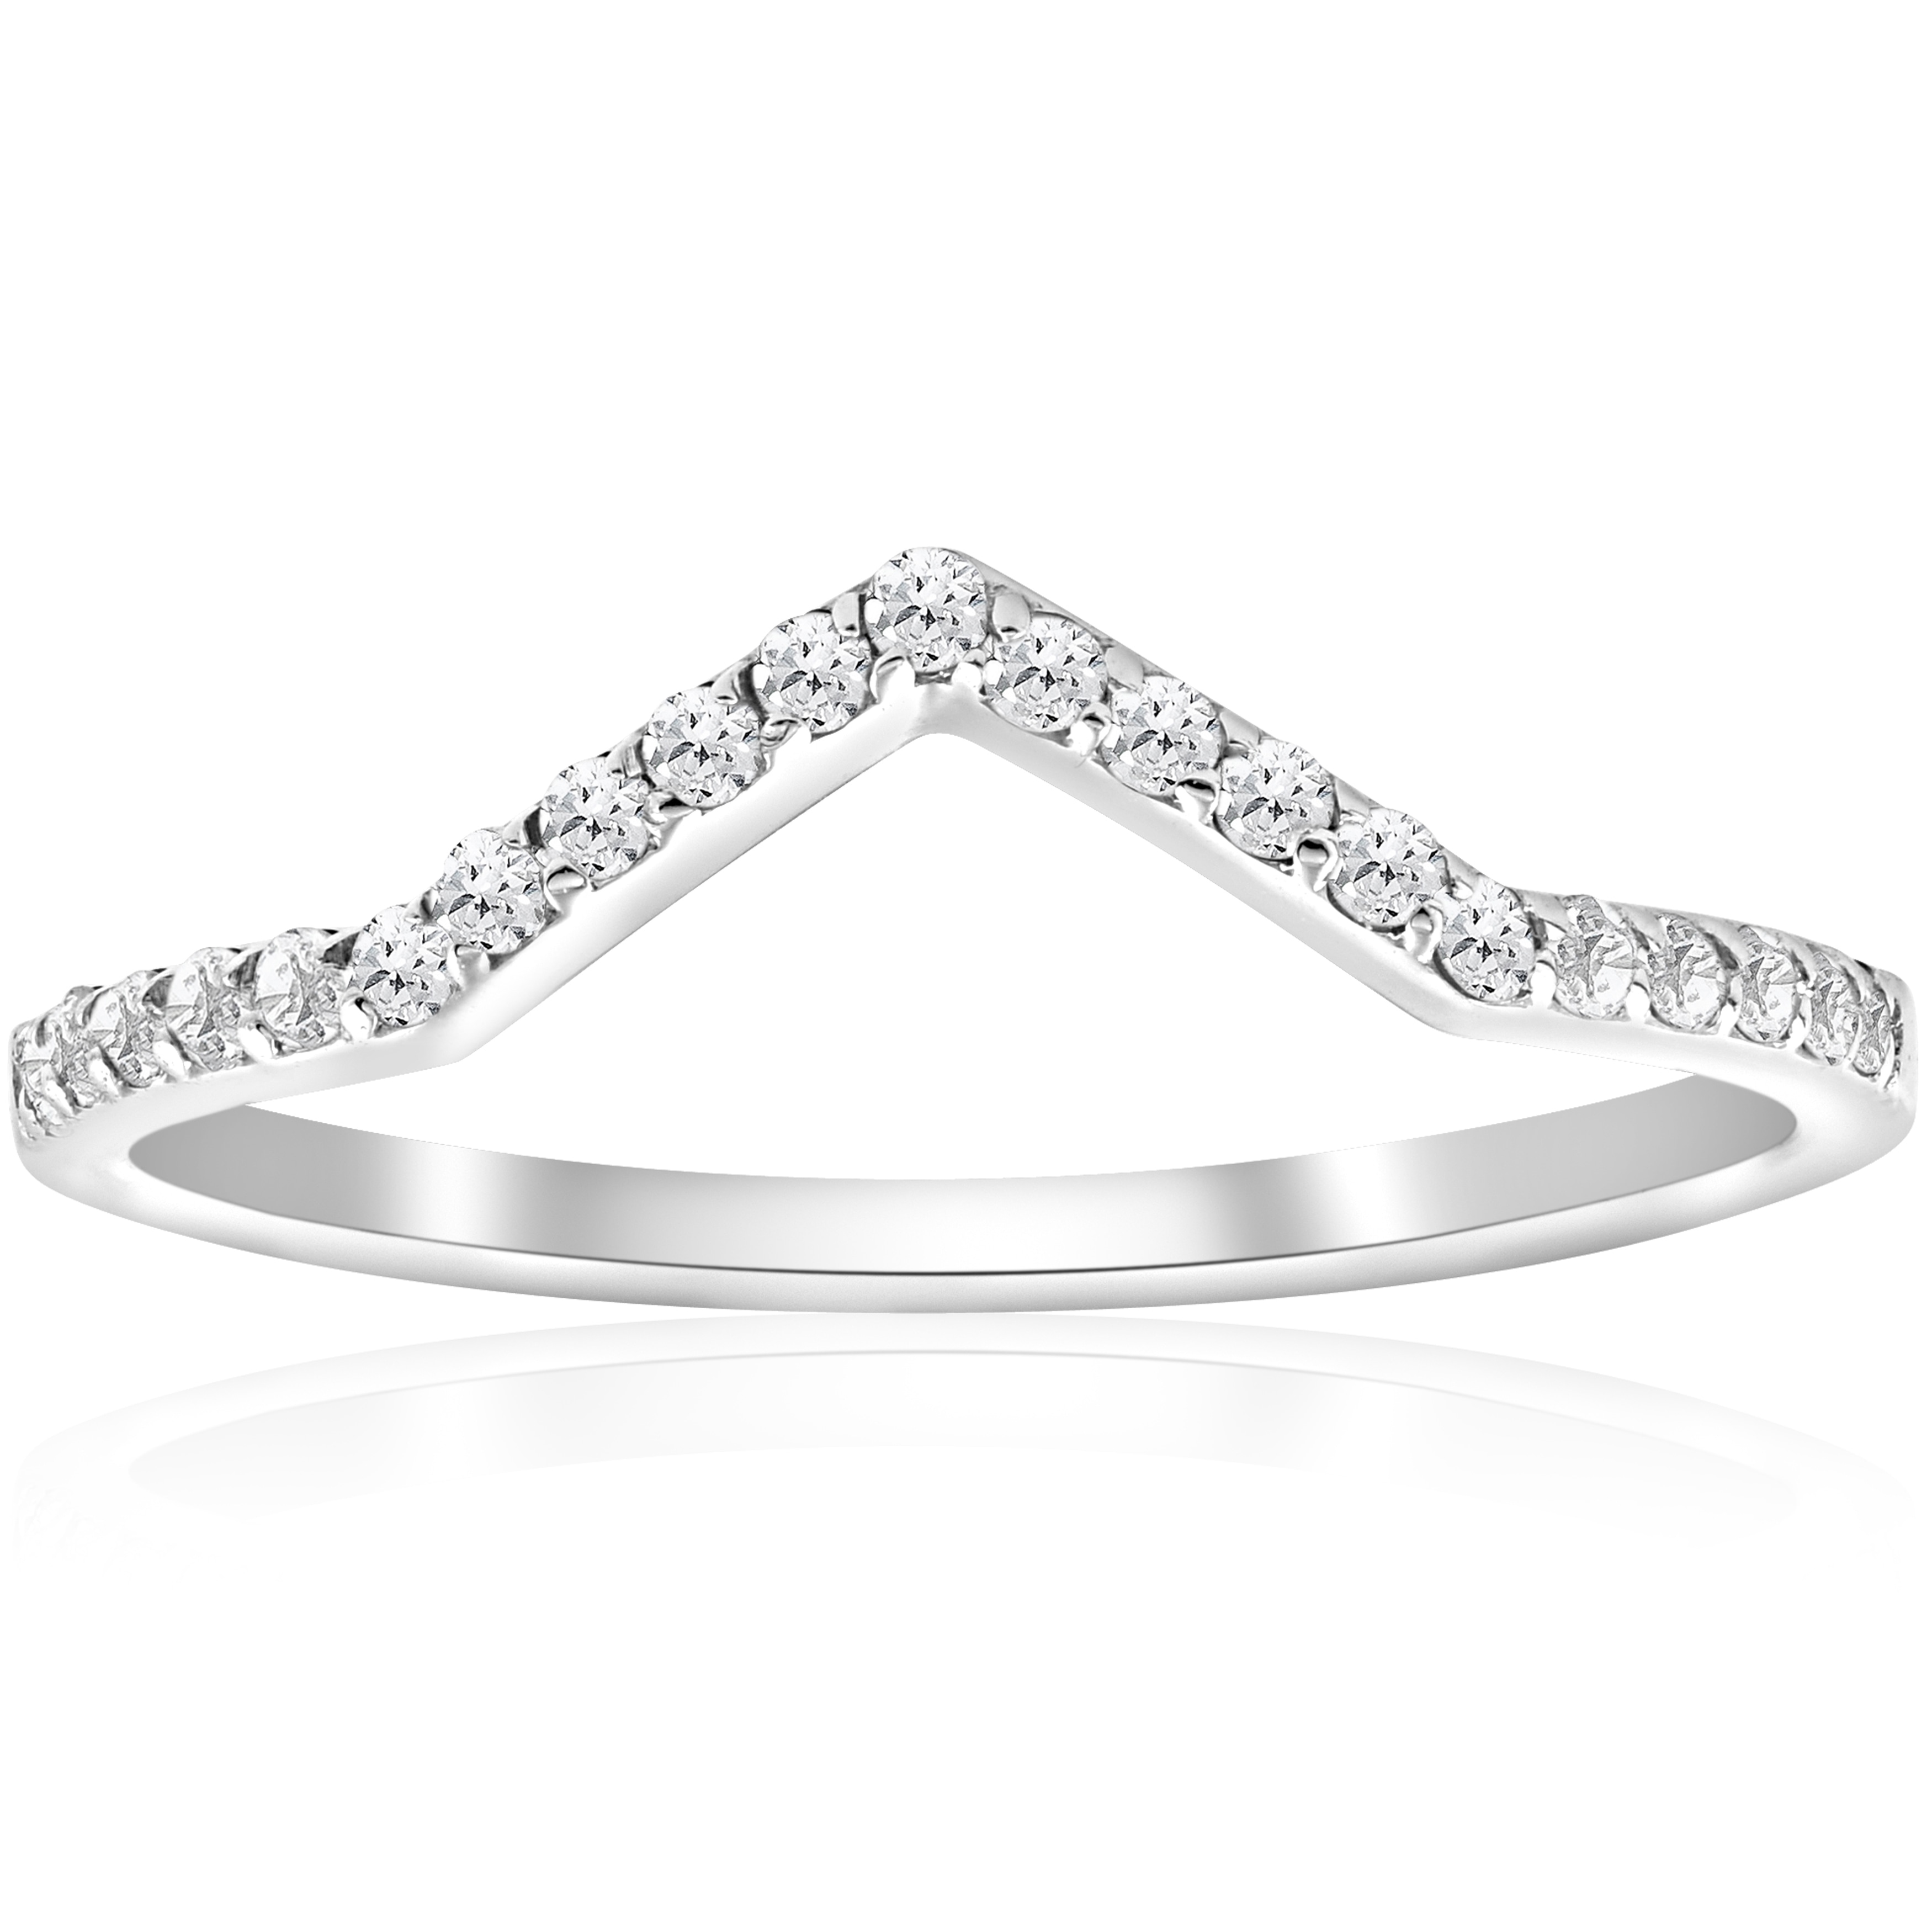 10kt White Gold Womens Round Diamond Zigzag Stackable Band Ring 1/5 Cttw